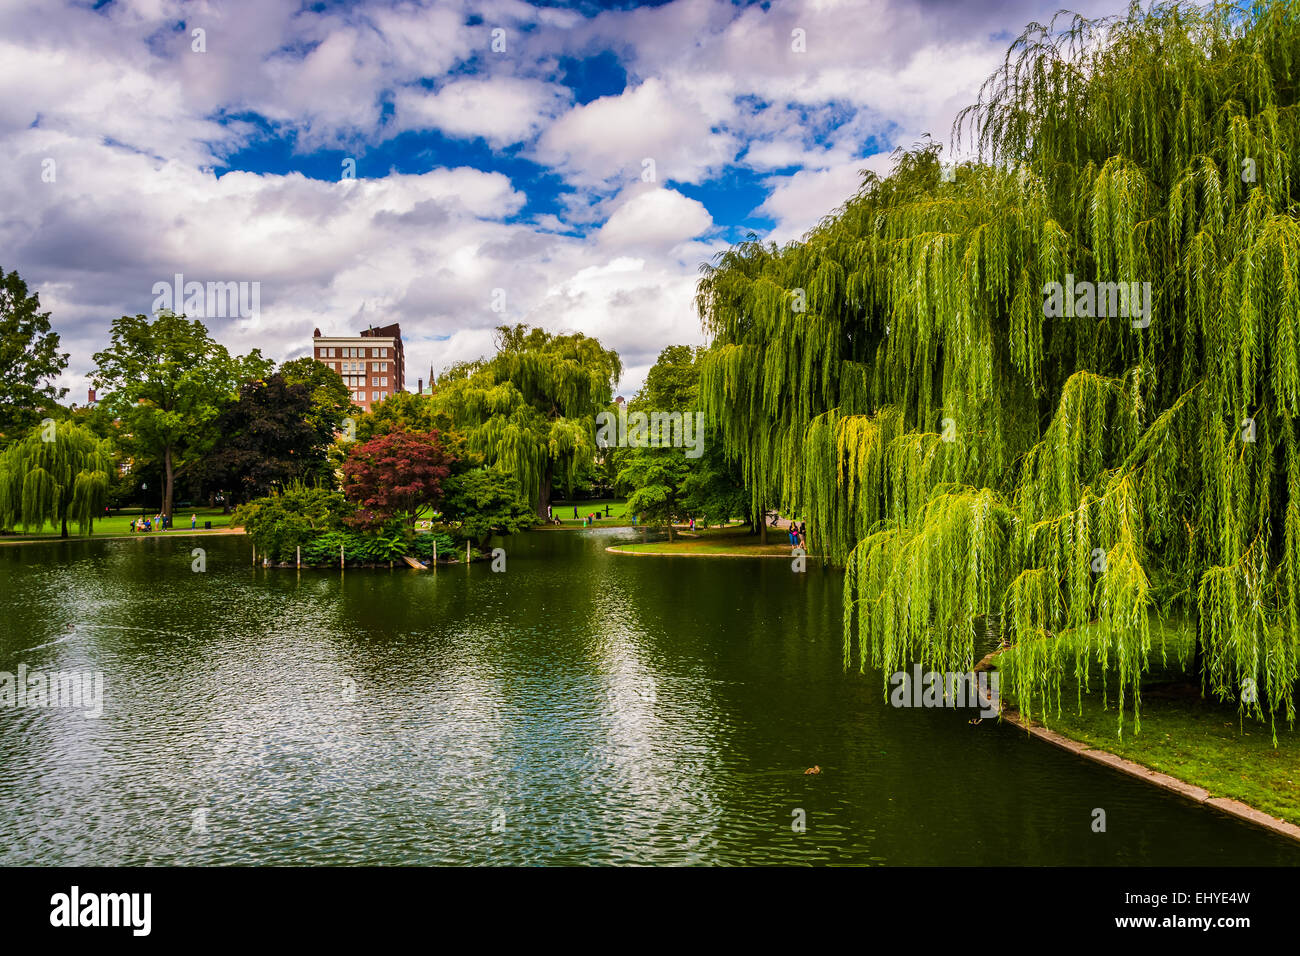 Weeping willow trees and a pond in the Boston Public Garden. Stock Photo